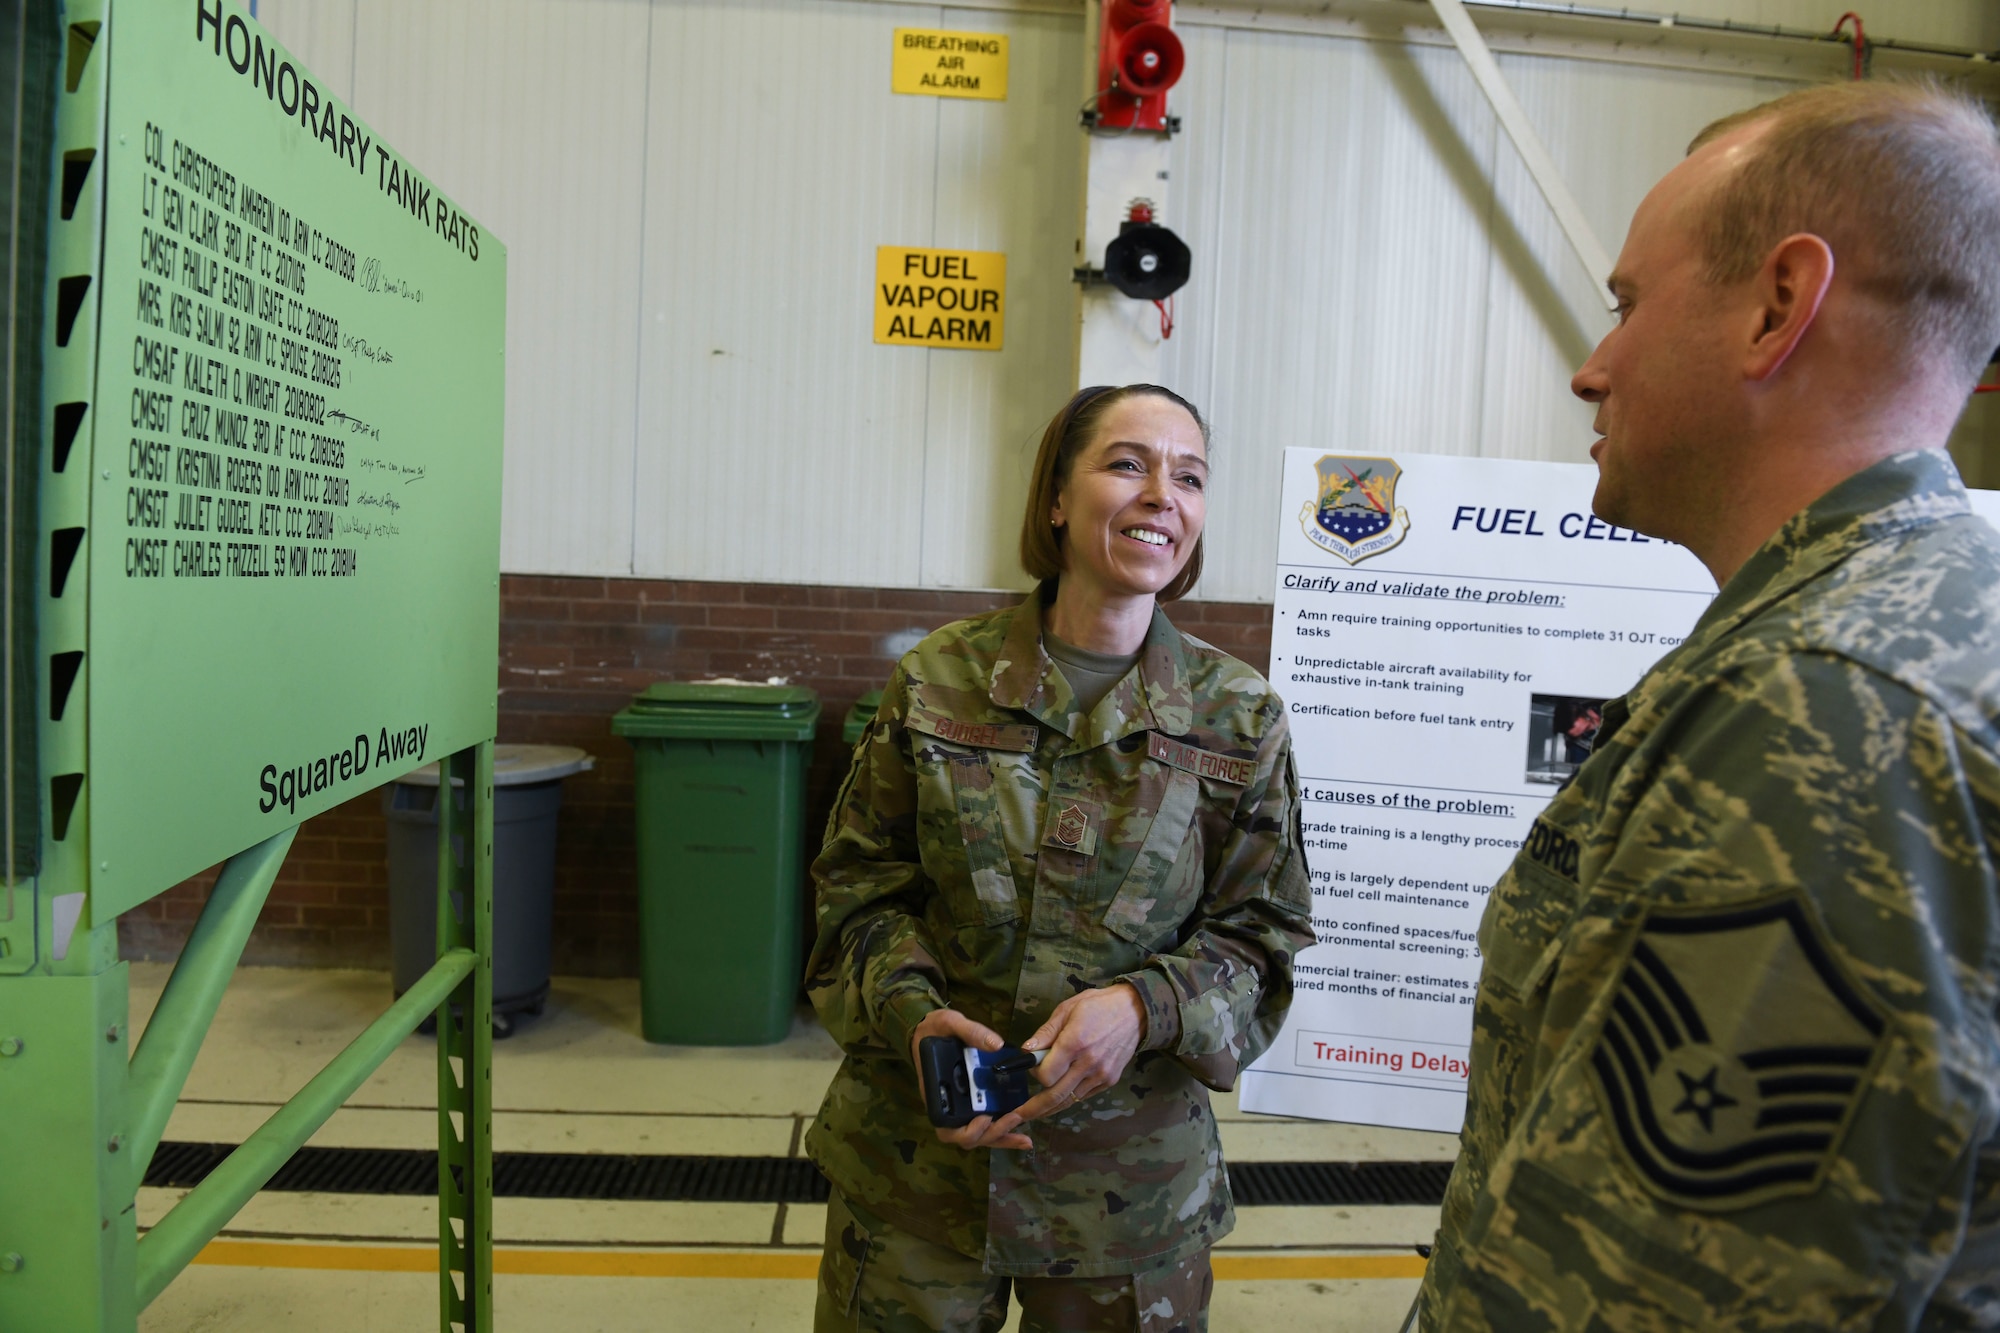 U.S. Air Force Chief Master Sgt. Juliet Gudgel, Air Education and Training Command command chief, and Master Sgt. Troy French, 100th Maintenance Squadron aircraft fuels system section chief, discuss the maintenance squadron’s confined space trainer at RAF Mildenhall, England, Nov. 14, 2018.  The 100th MXS presented the chief with the newest innovation to show how those innovations sustain mission effectiveness. (U.S. Air Force photo by Airman 1st Class Alexandria Lee)